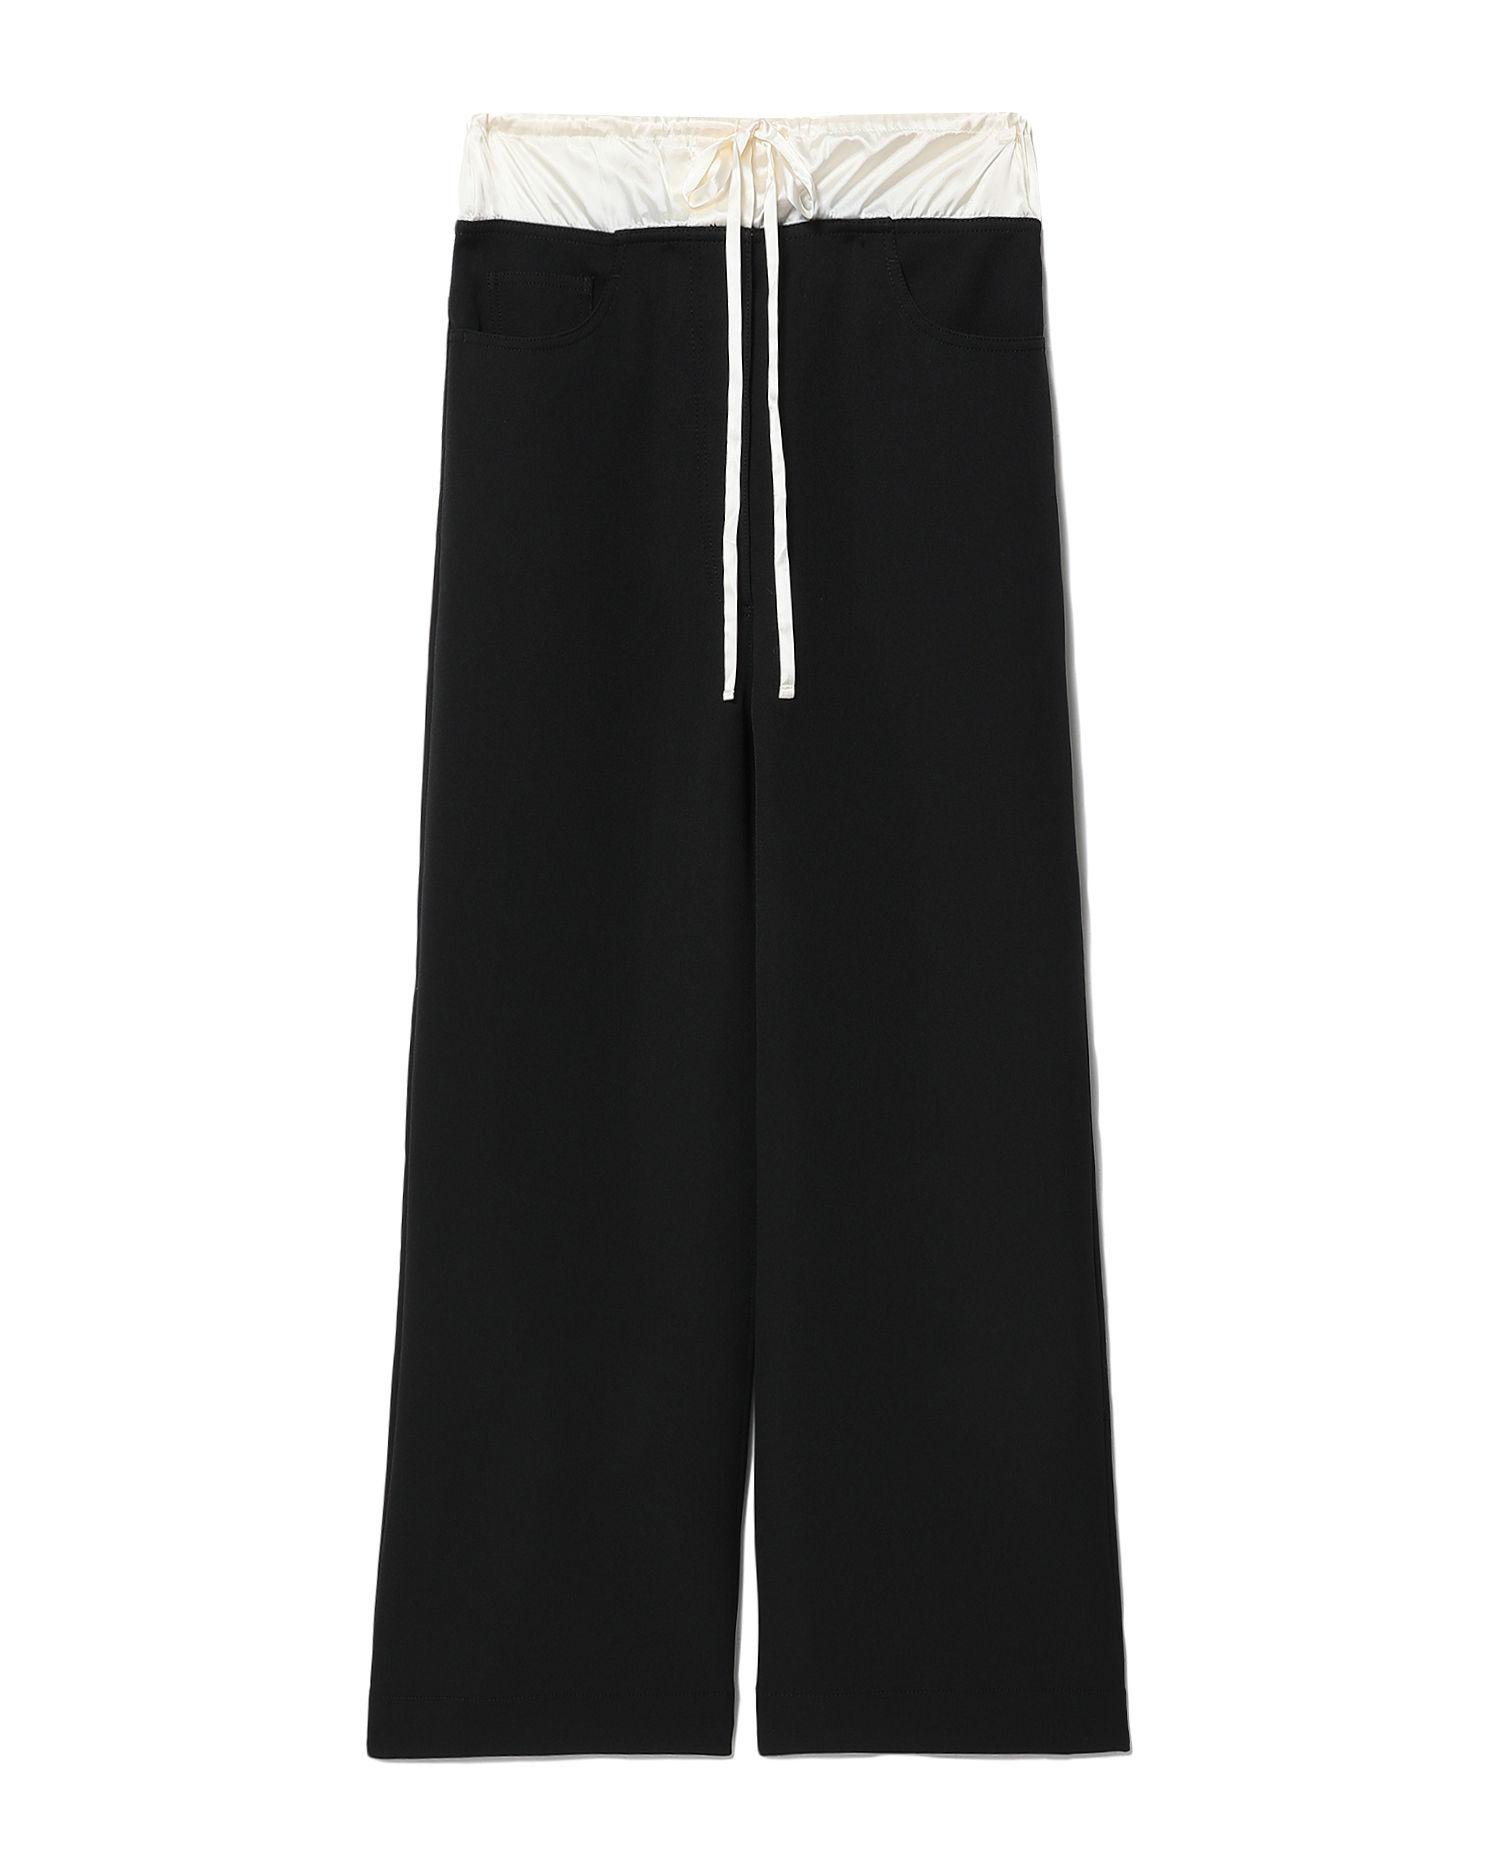 Satin contrast trousers by ACNE STUDIOS